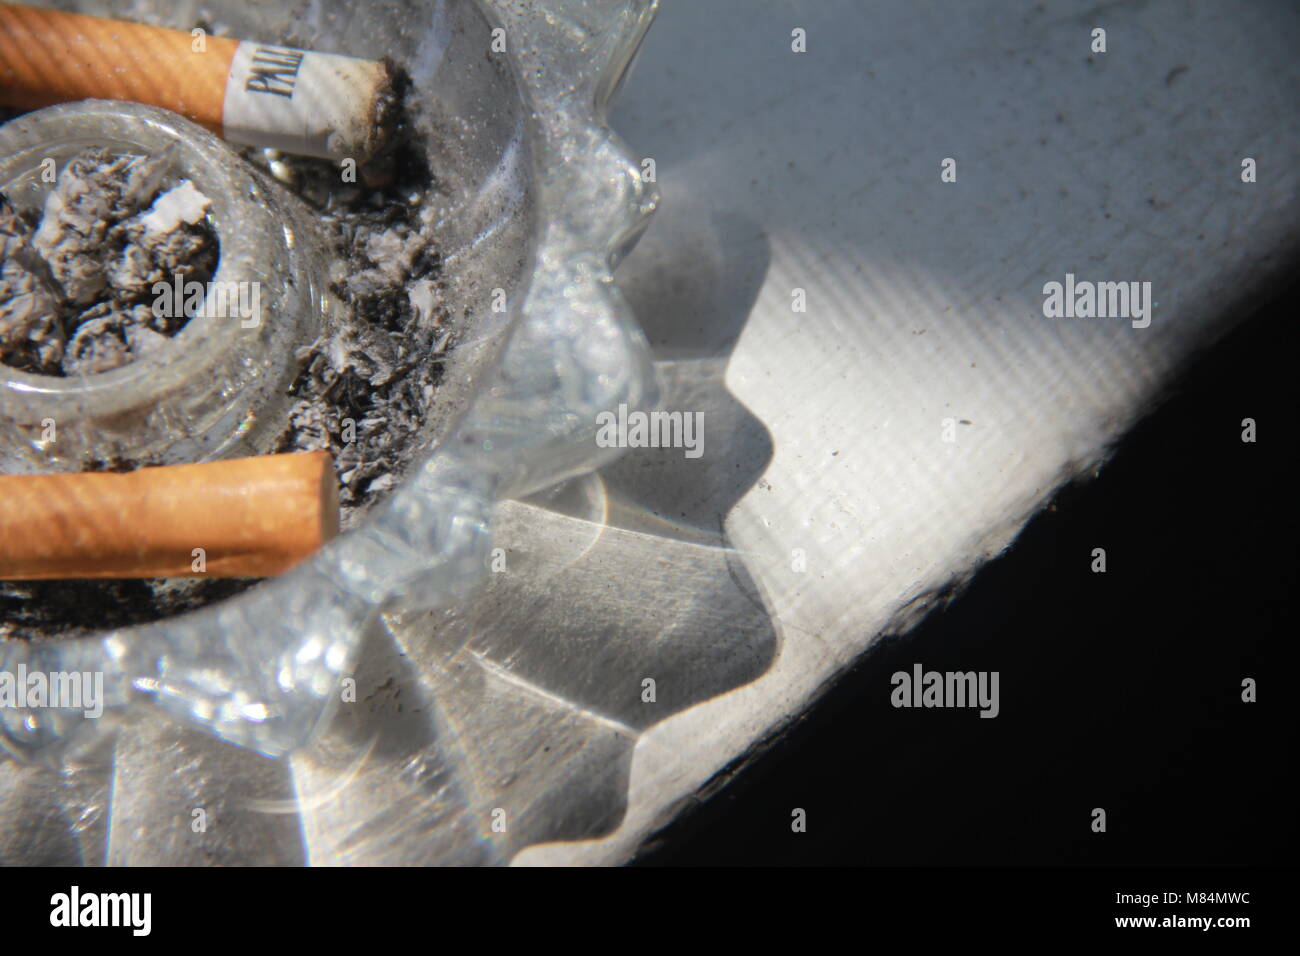 Cigarettes in a crystal ashtray on window sill. Stock Photo